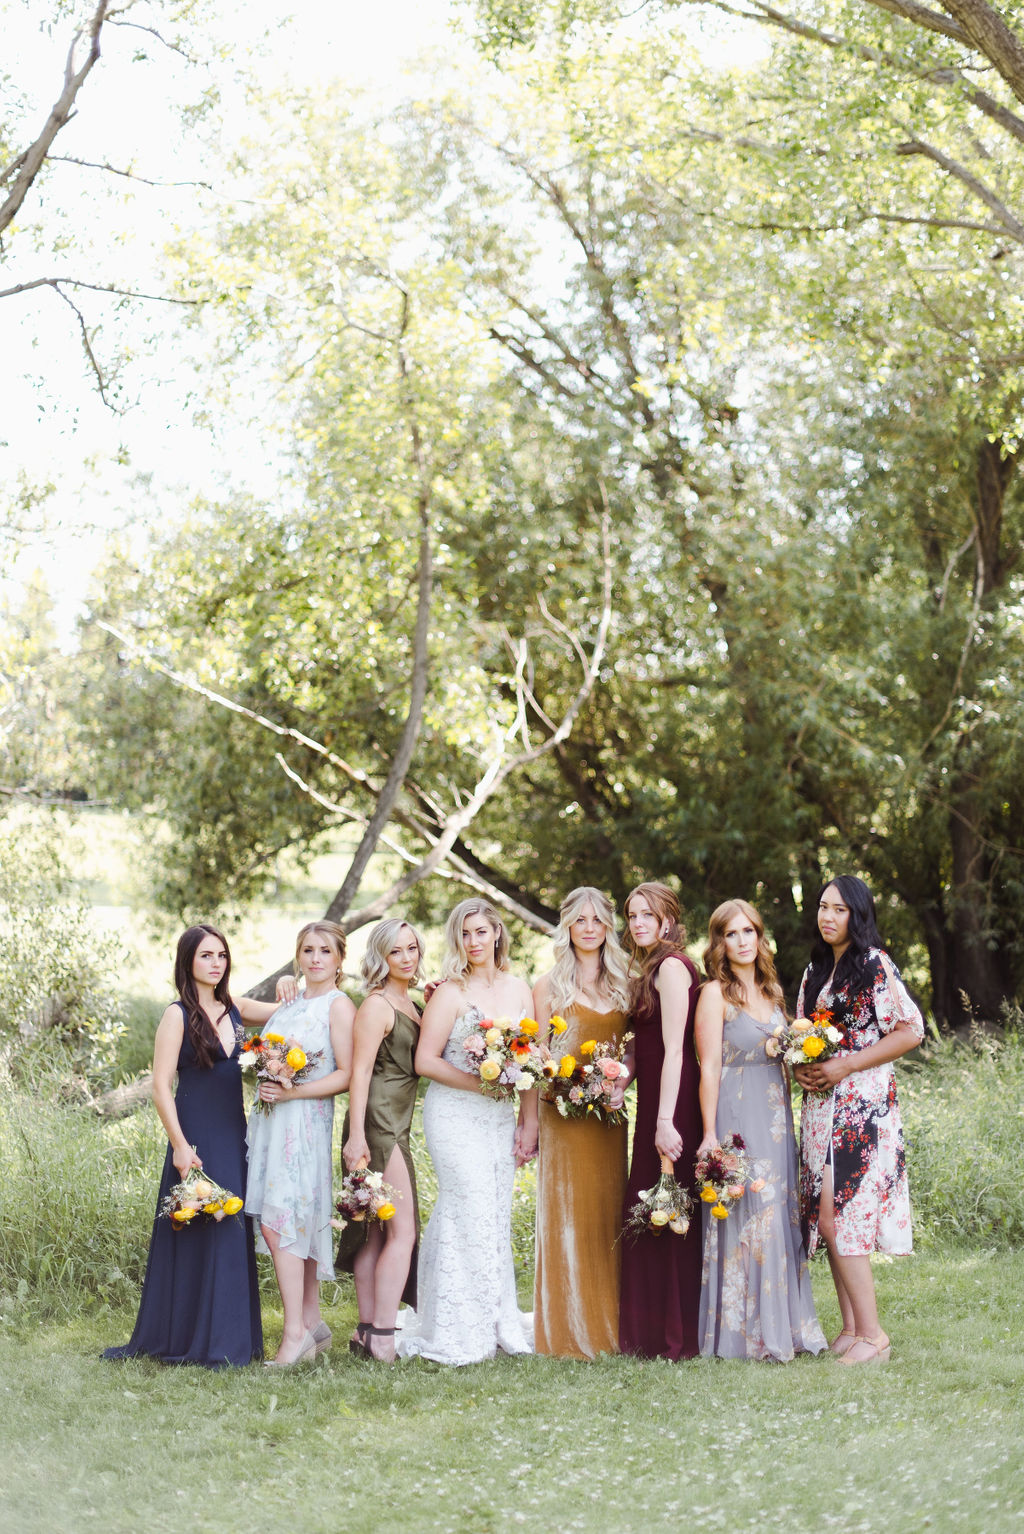 Bridesmaids in mismatching modern gowns pose with the bride on her wedding day